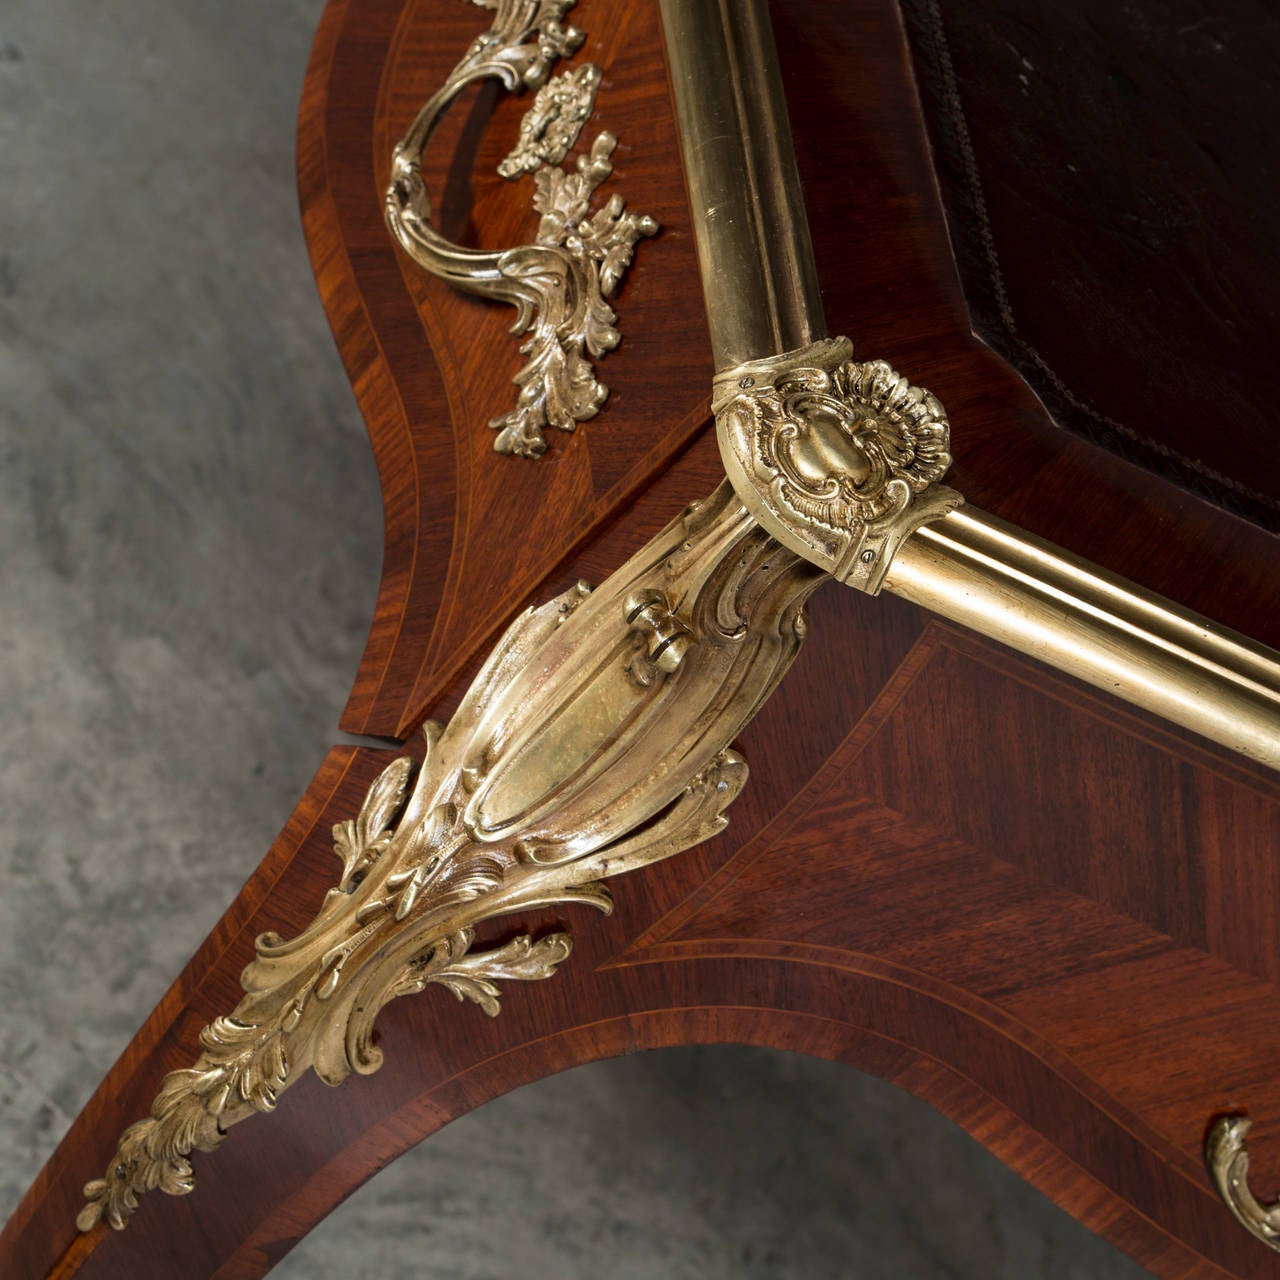 Desk (bureau plat), Napoleon III- or Rococo style. Walnut veneered with gilt bronze mounting on the tables edge and legs. The table top with leather. France about 1920.